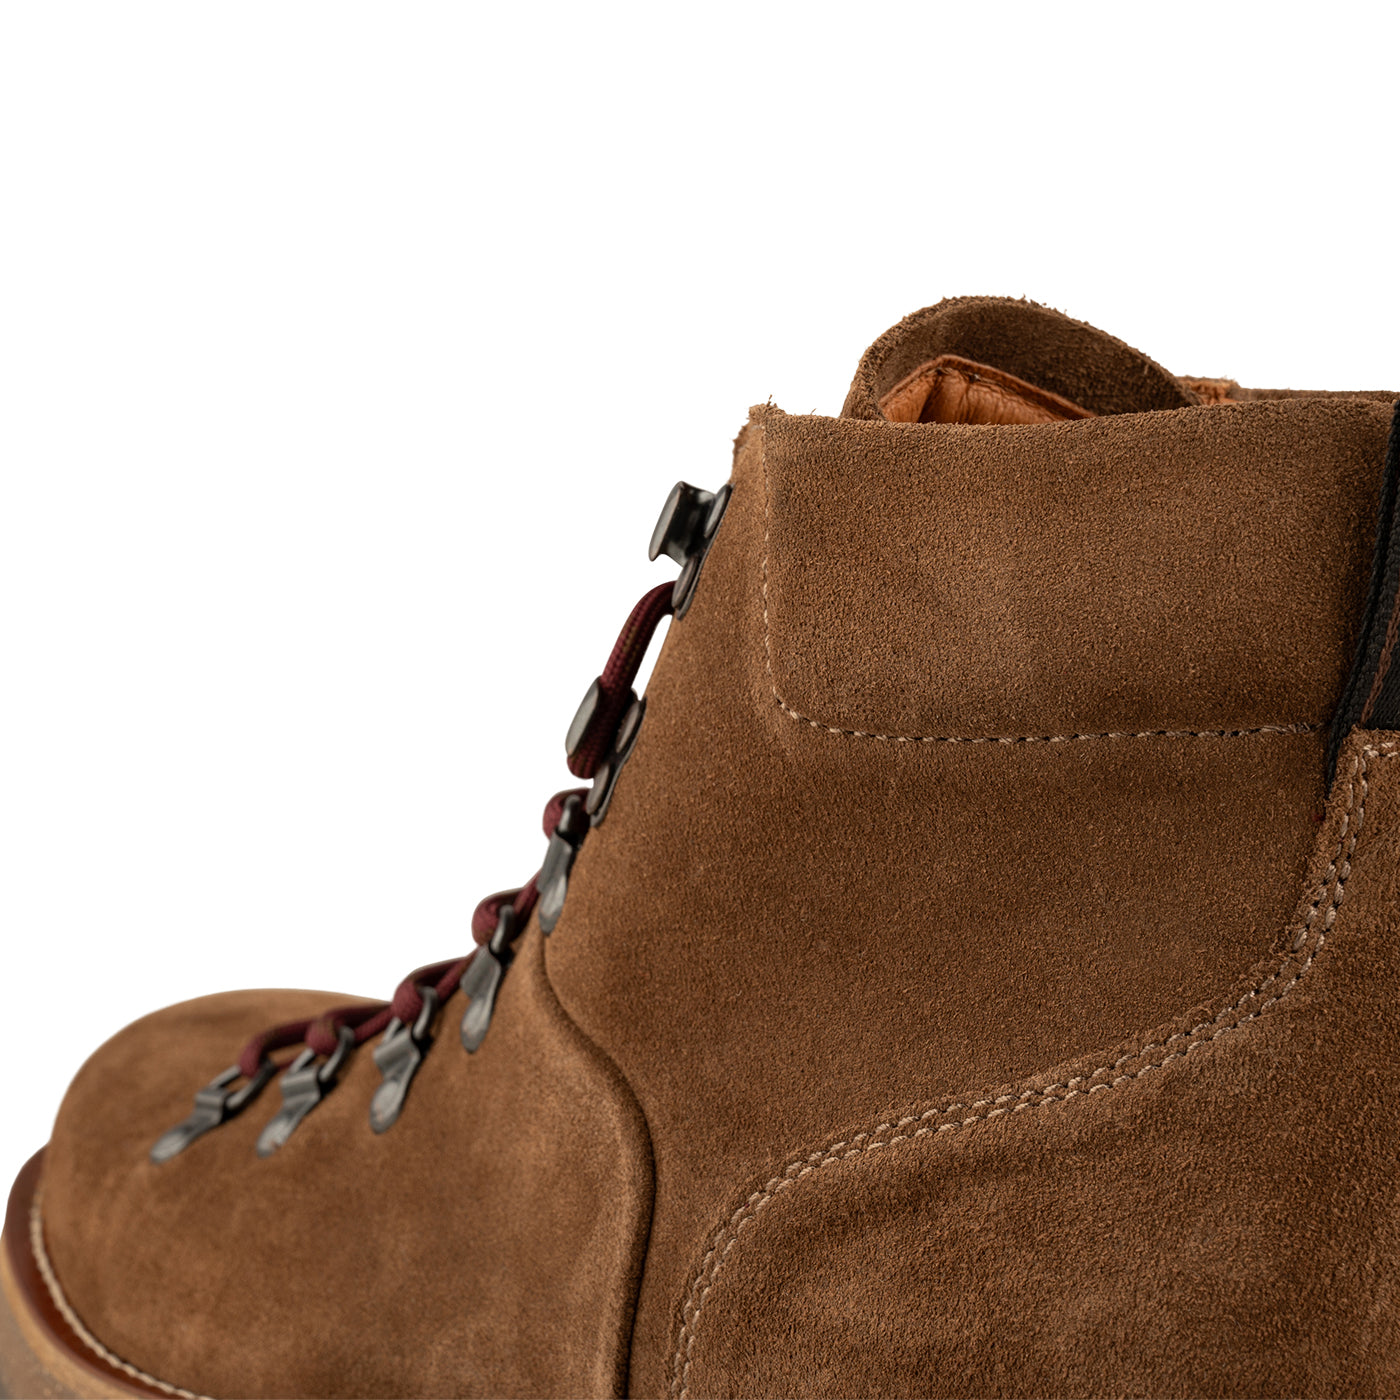 SHOE THE BEAR MENS Rosco Boot Water Repellent Suede Boots 052 Tan